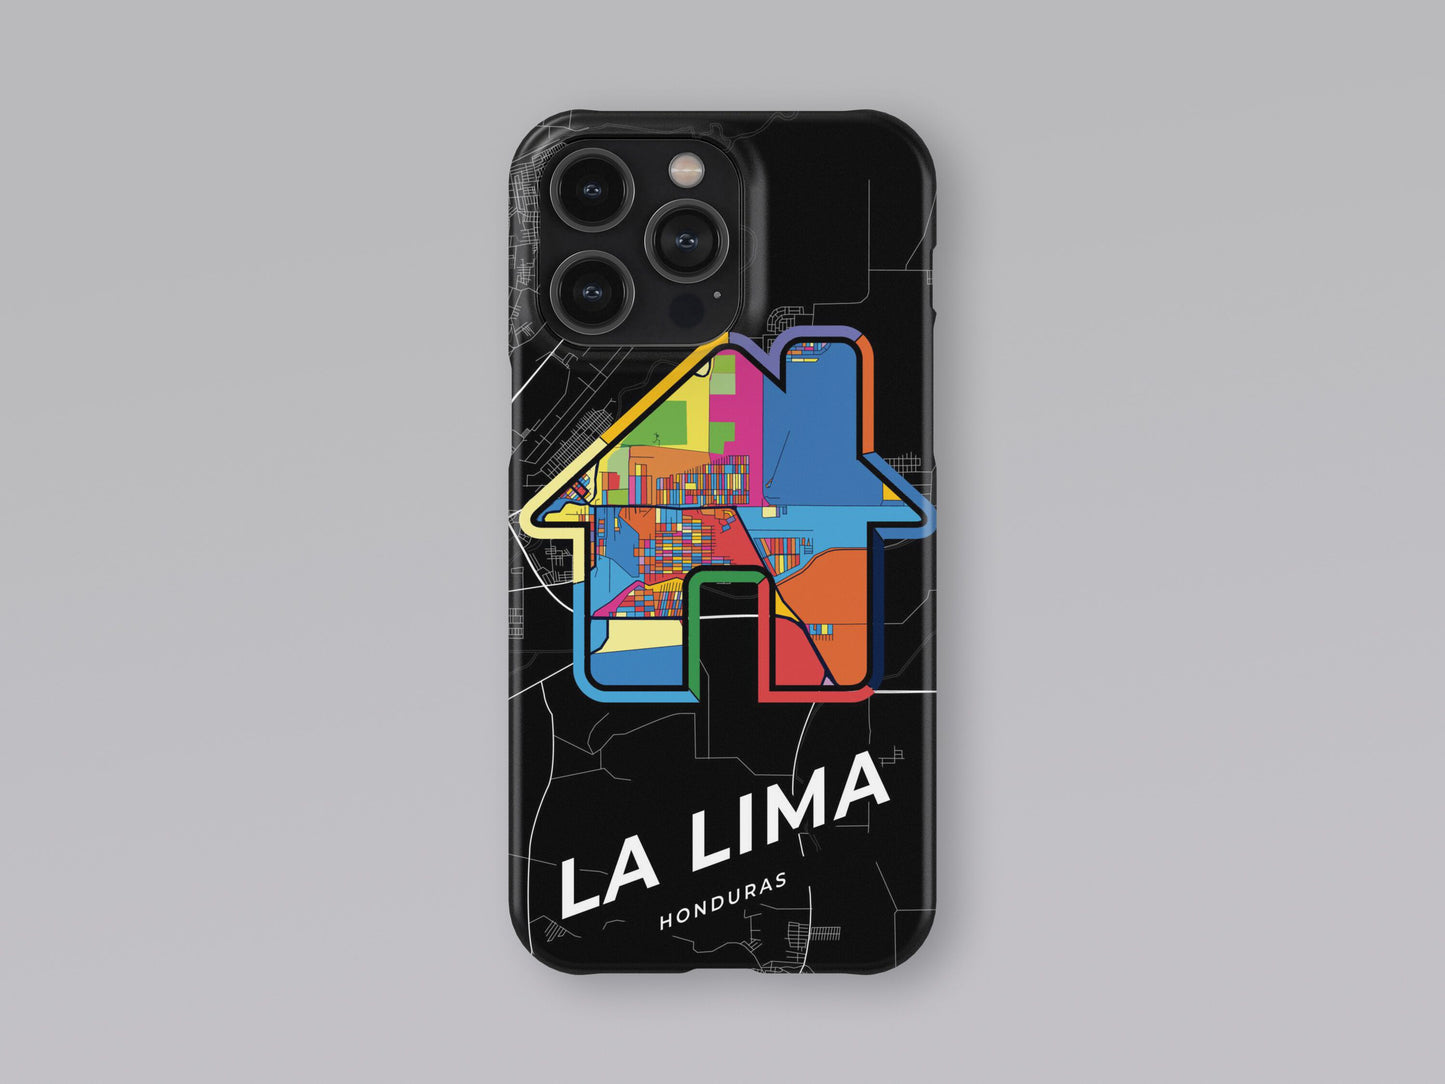 La Lima Honduras slim phone case with colorful icon. Birthday, wedding or housewarming gift. Couple match cases. 3